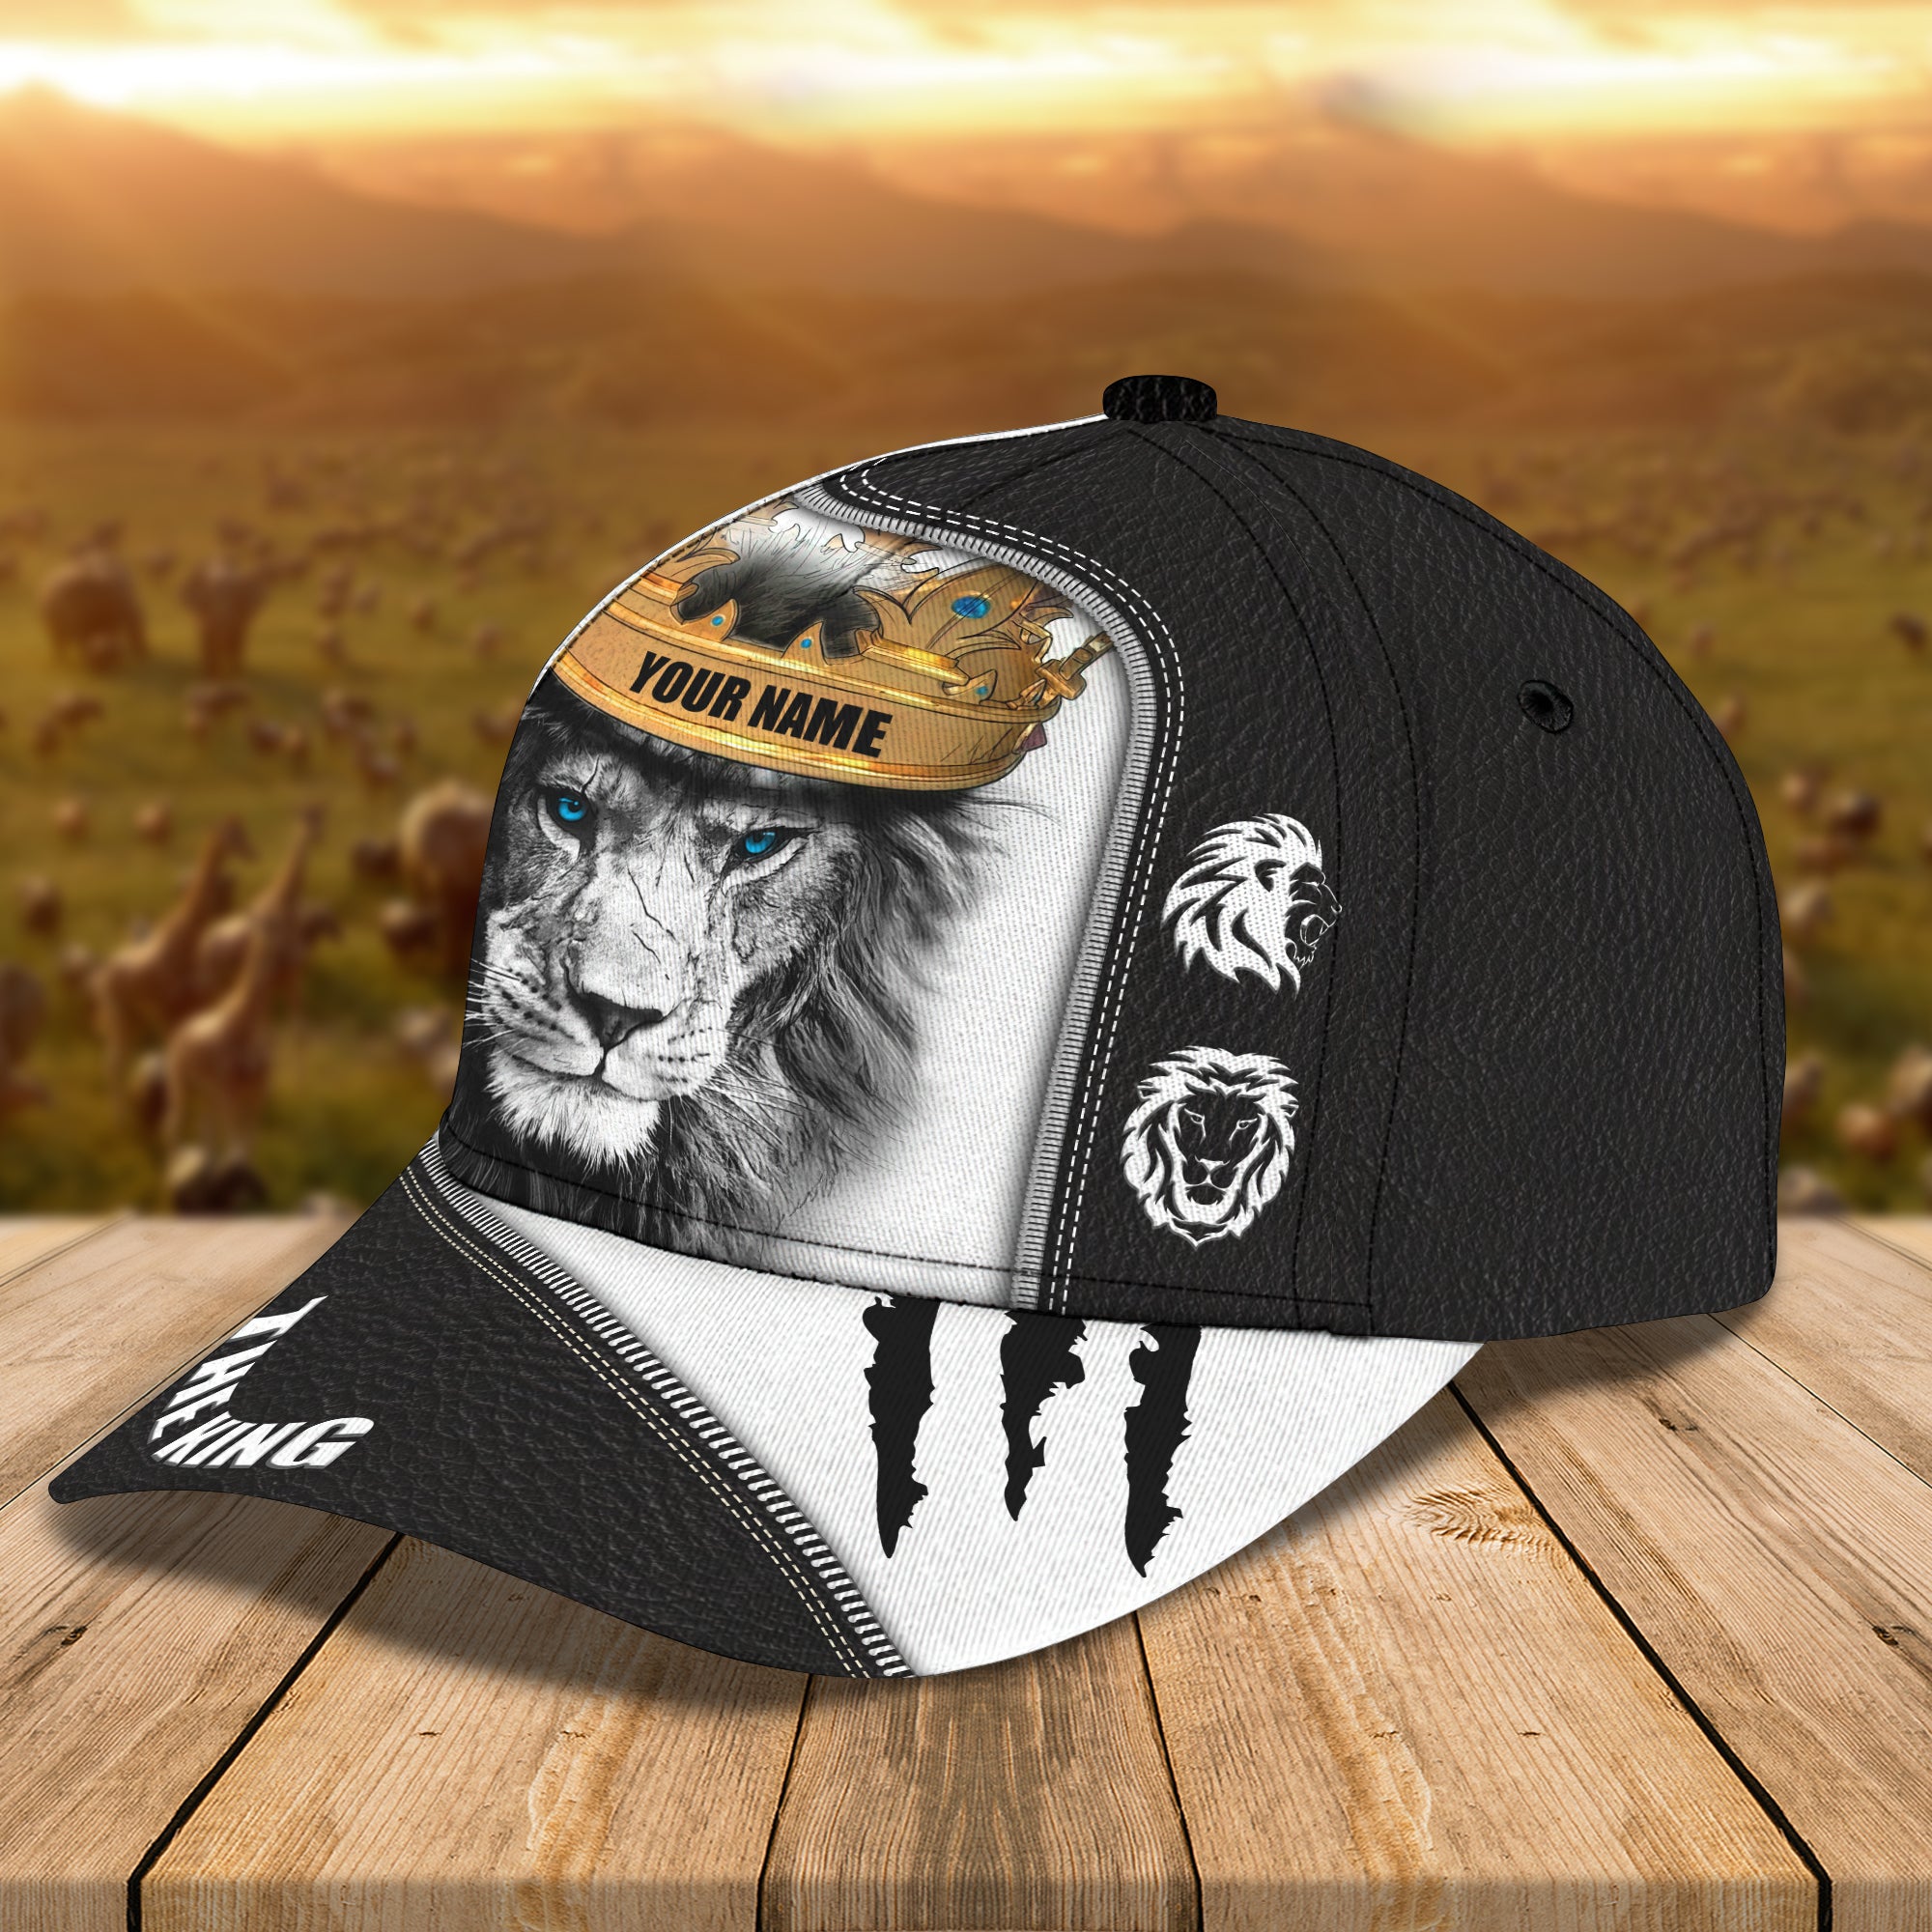 THE KING - Personalized Name Cap 01- RINC98